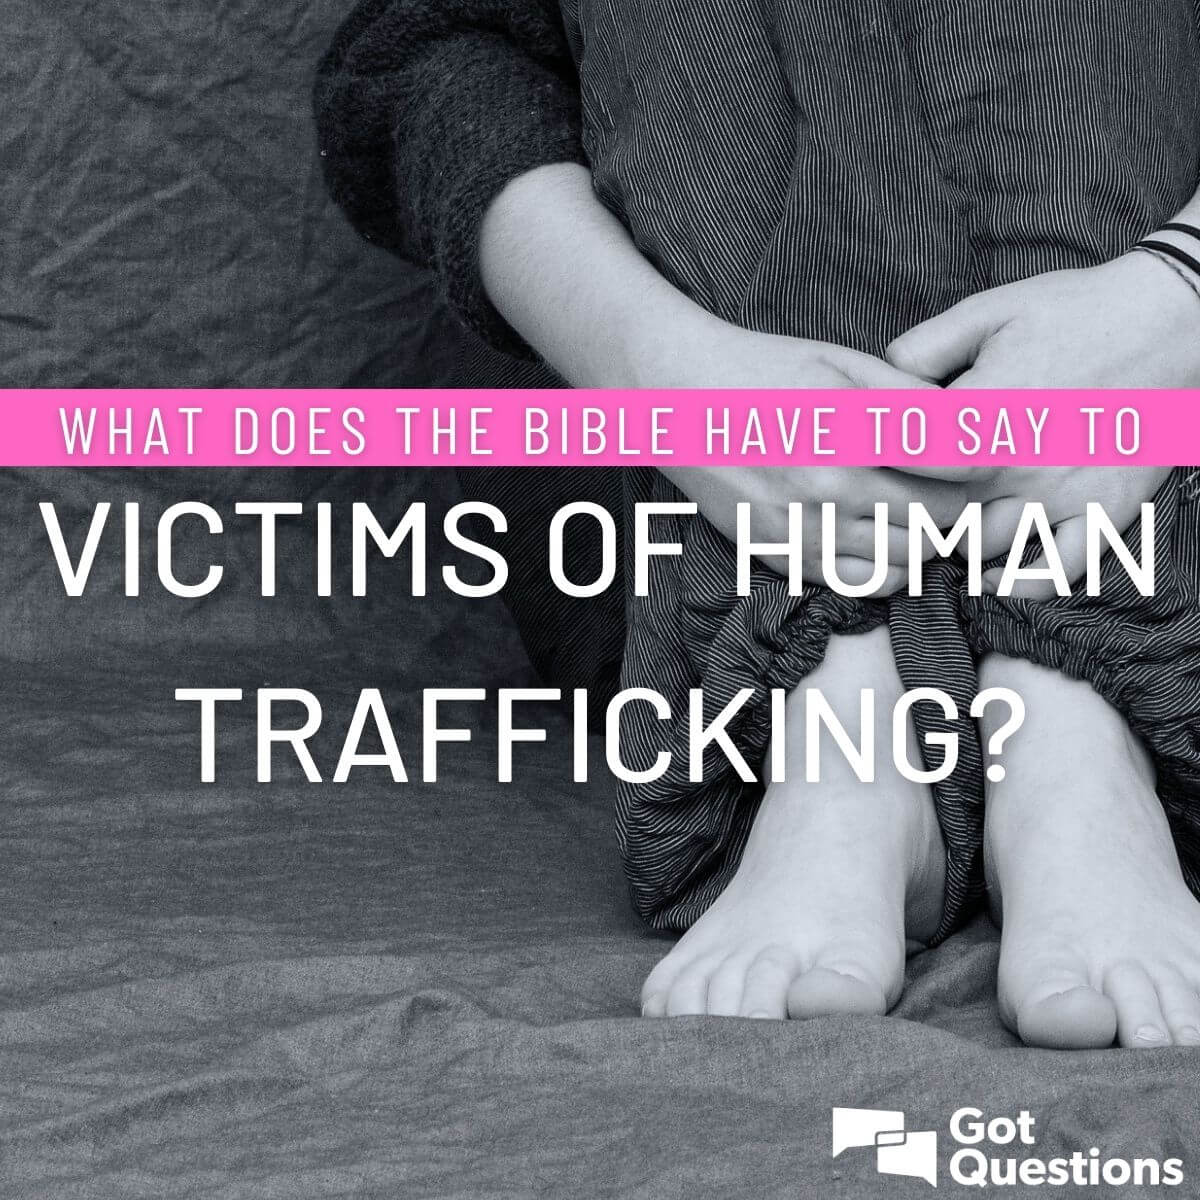 What Does The Bible Have To Say To Victims Of Human Trafficking